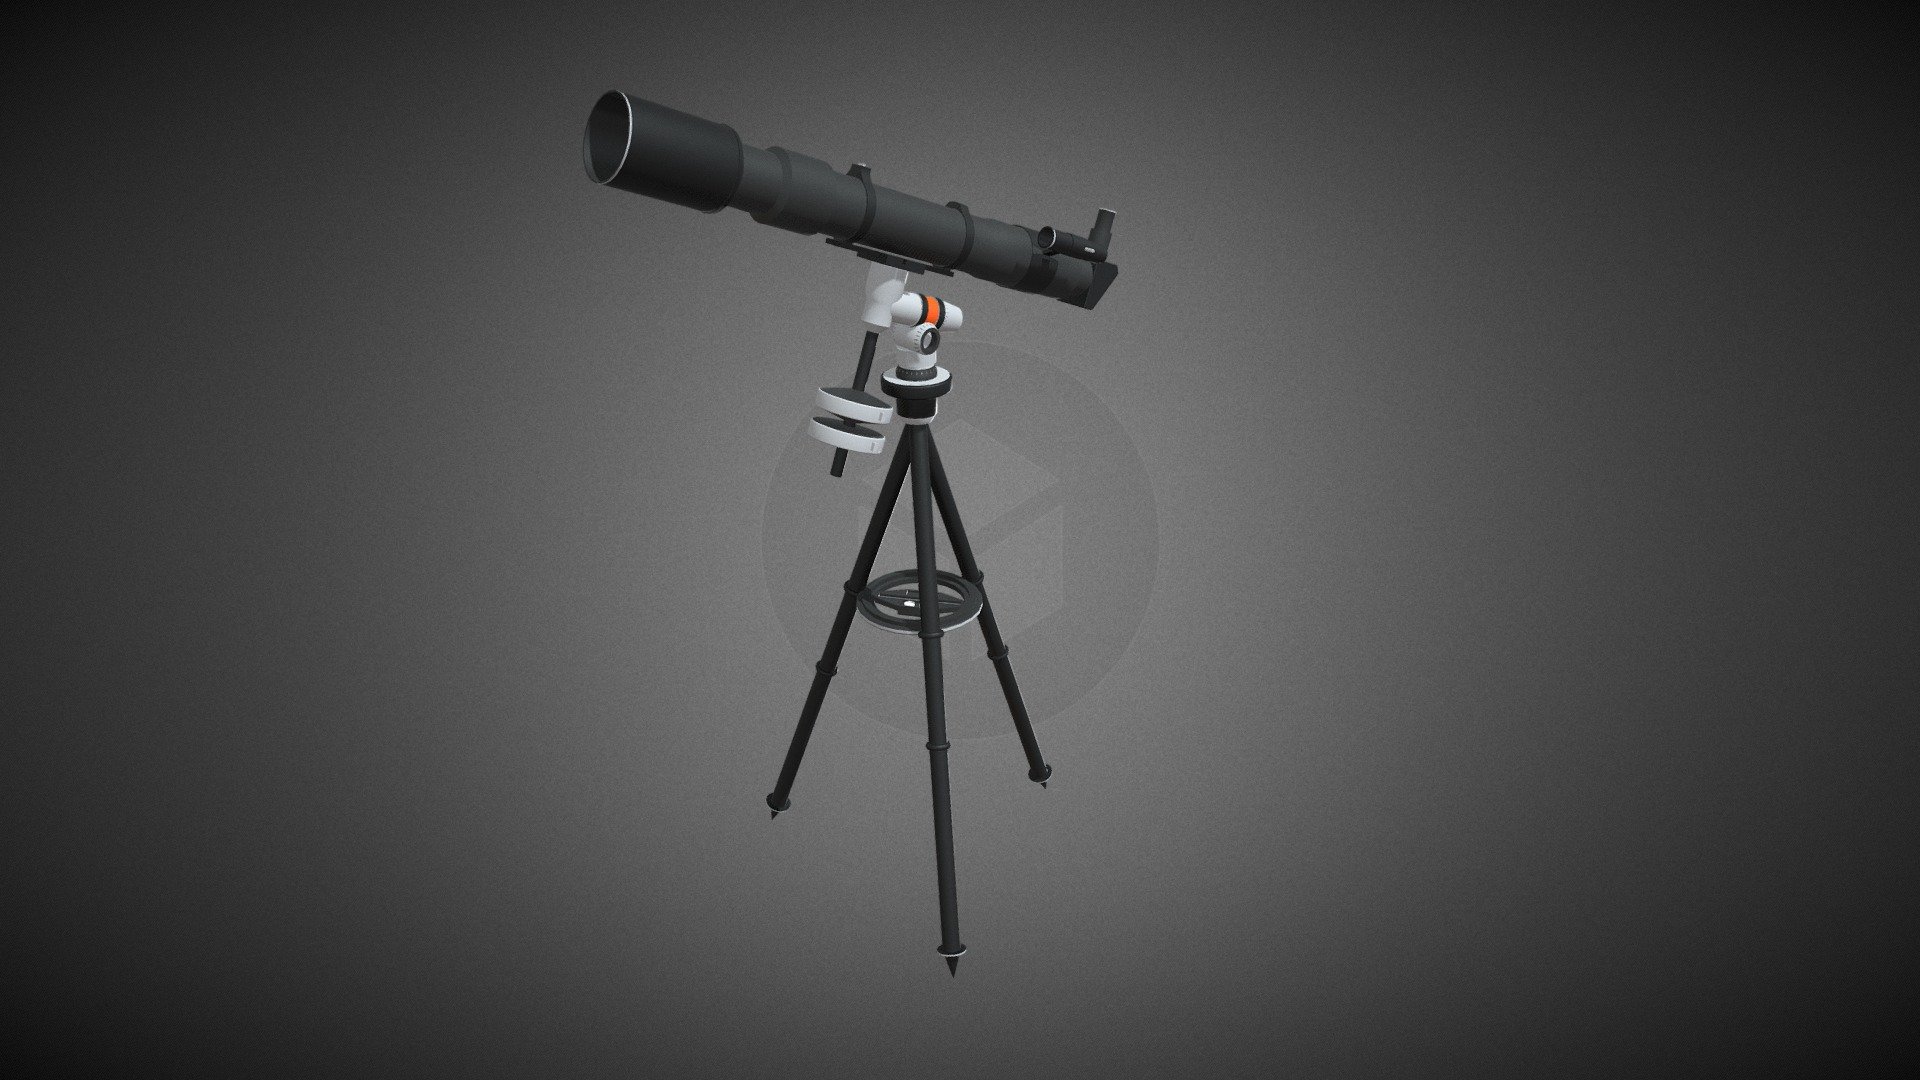 Dear 3D artist,

let me know how you use this free 3D asset. Have fun!

Chris Eckert


Item:
Refractor_Telescope

Issued:
26jan2020

Description:
Realistic depiction of a refractor telescope with mount and tripod

Recommended Usage:
Prop - Refractor Telescope - Download Free 3D model by Chris Eckert (@ceckert) 3d model